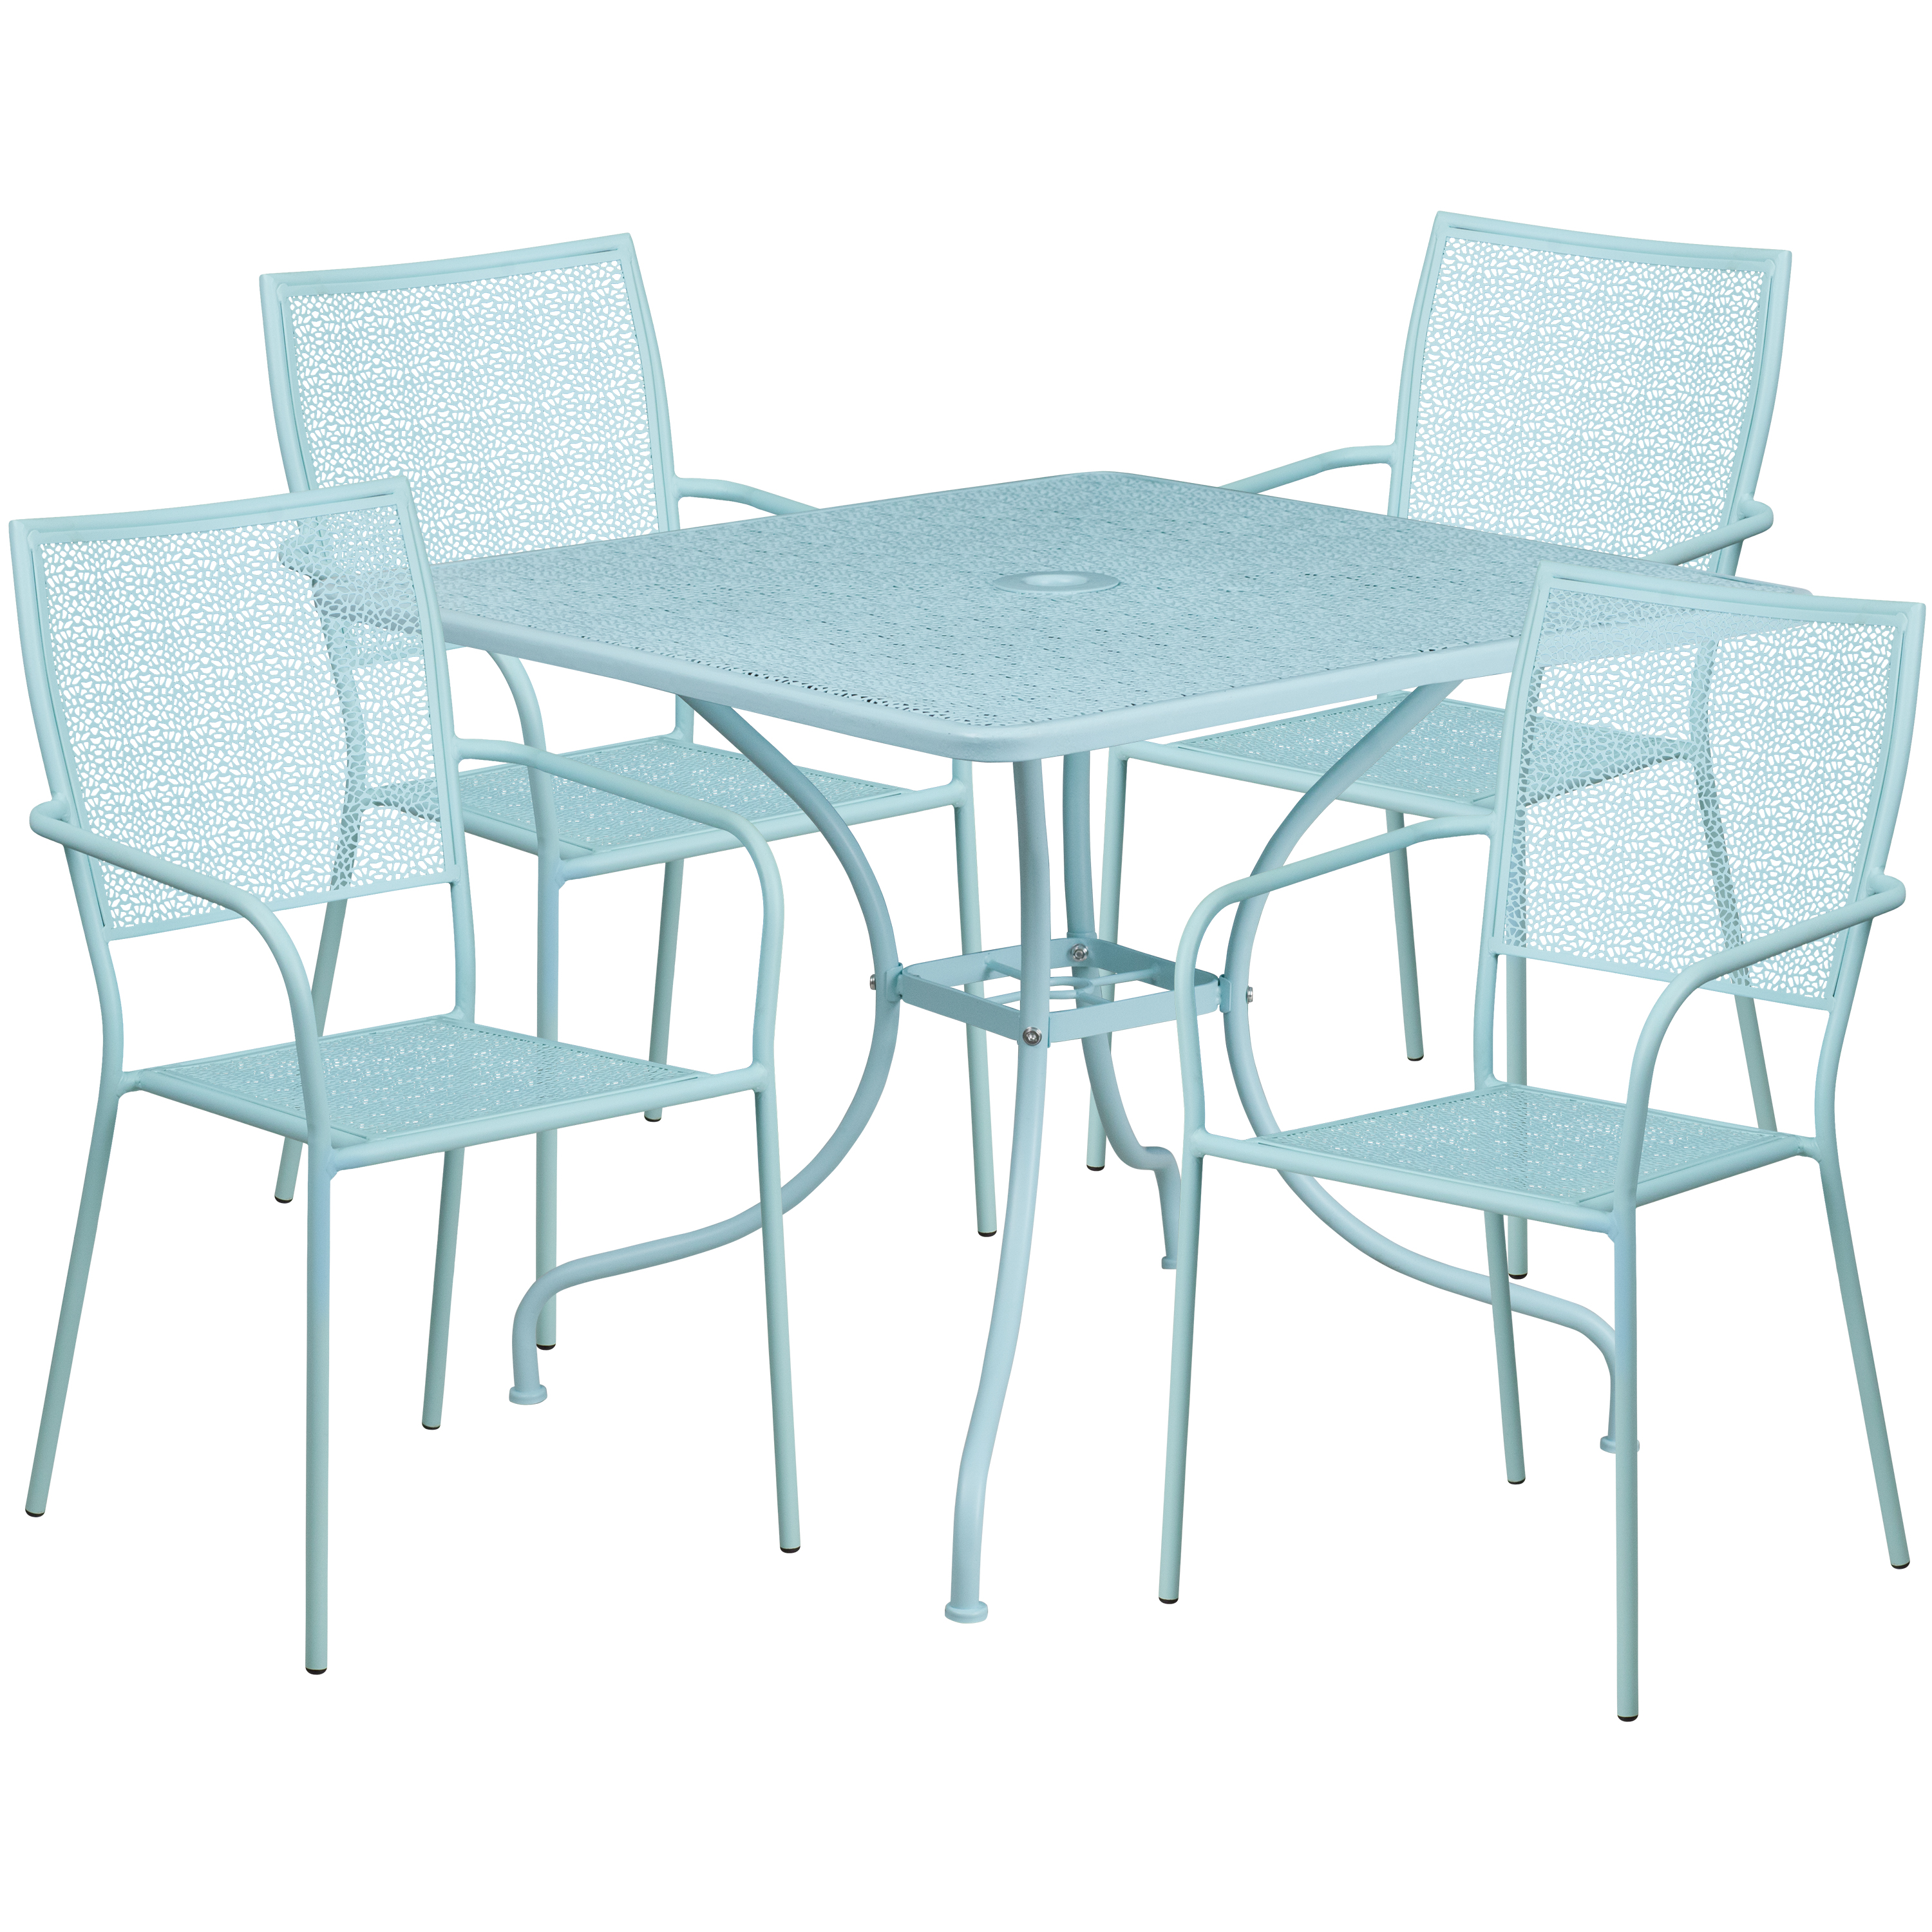 Flash Furniture Oia Commercial Grade 35.5" Square Sky Blue Indoor-Outdoor Steel Patio Table Set with 4 Square Back Chairs - image 1 of 5